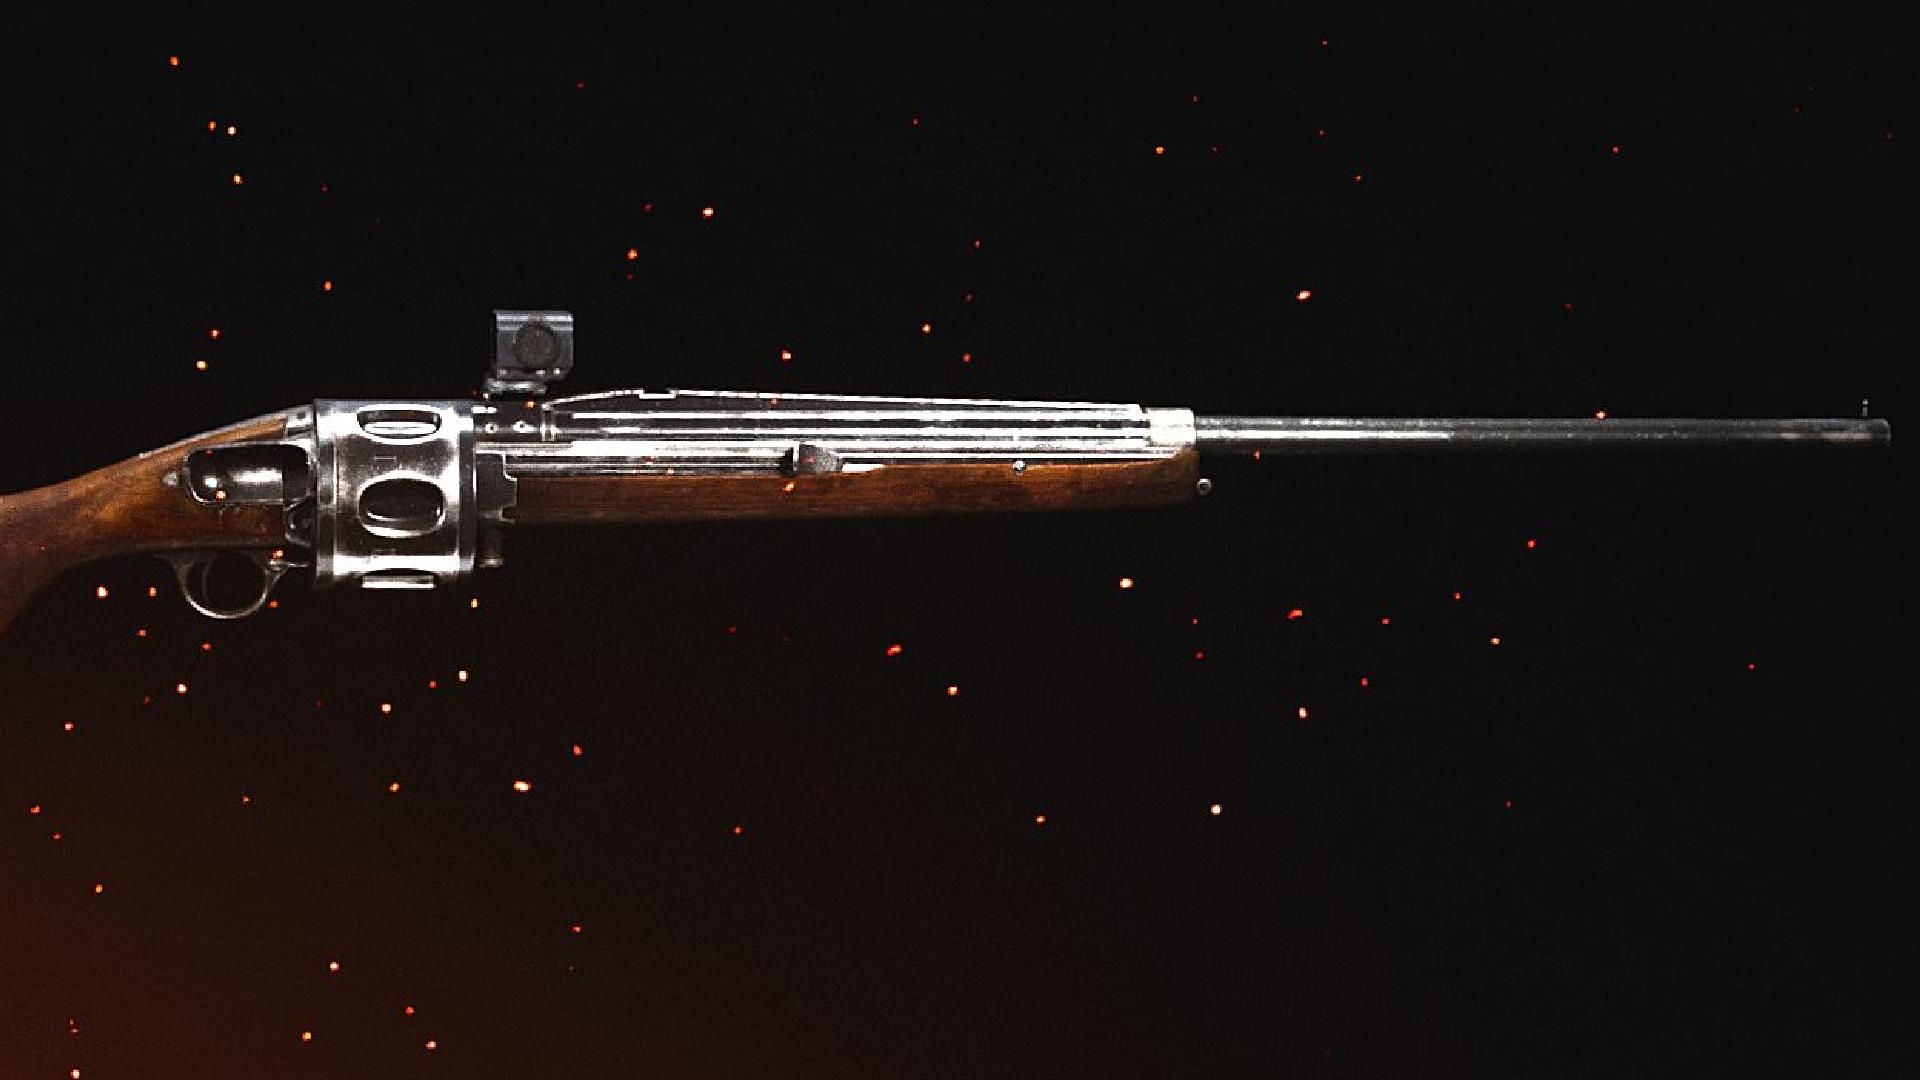 CoD Vanguard launch weapons: The Revolving Shotgun can be seen in the game's menu.